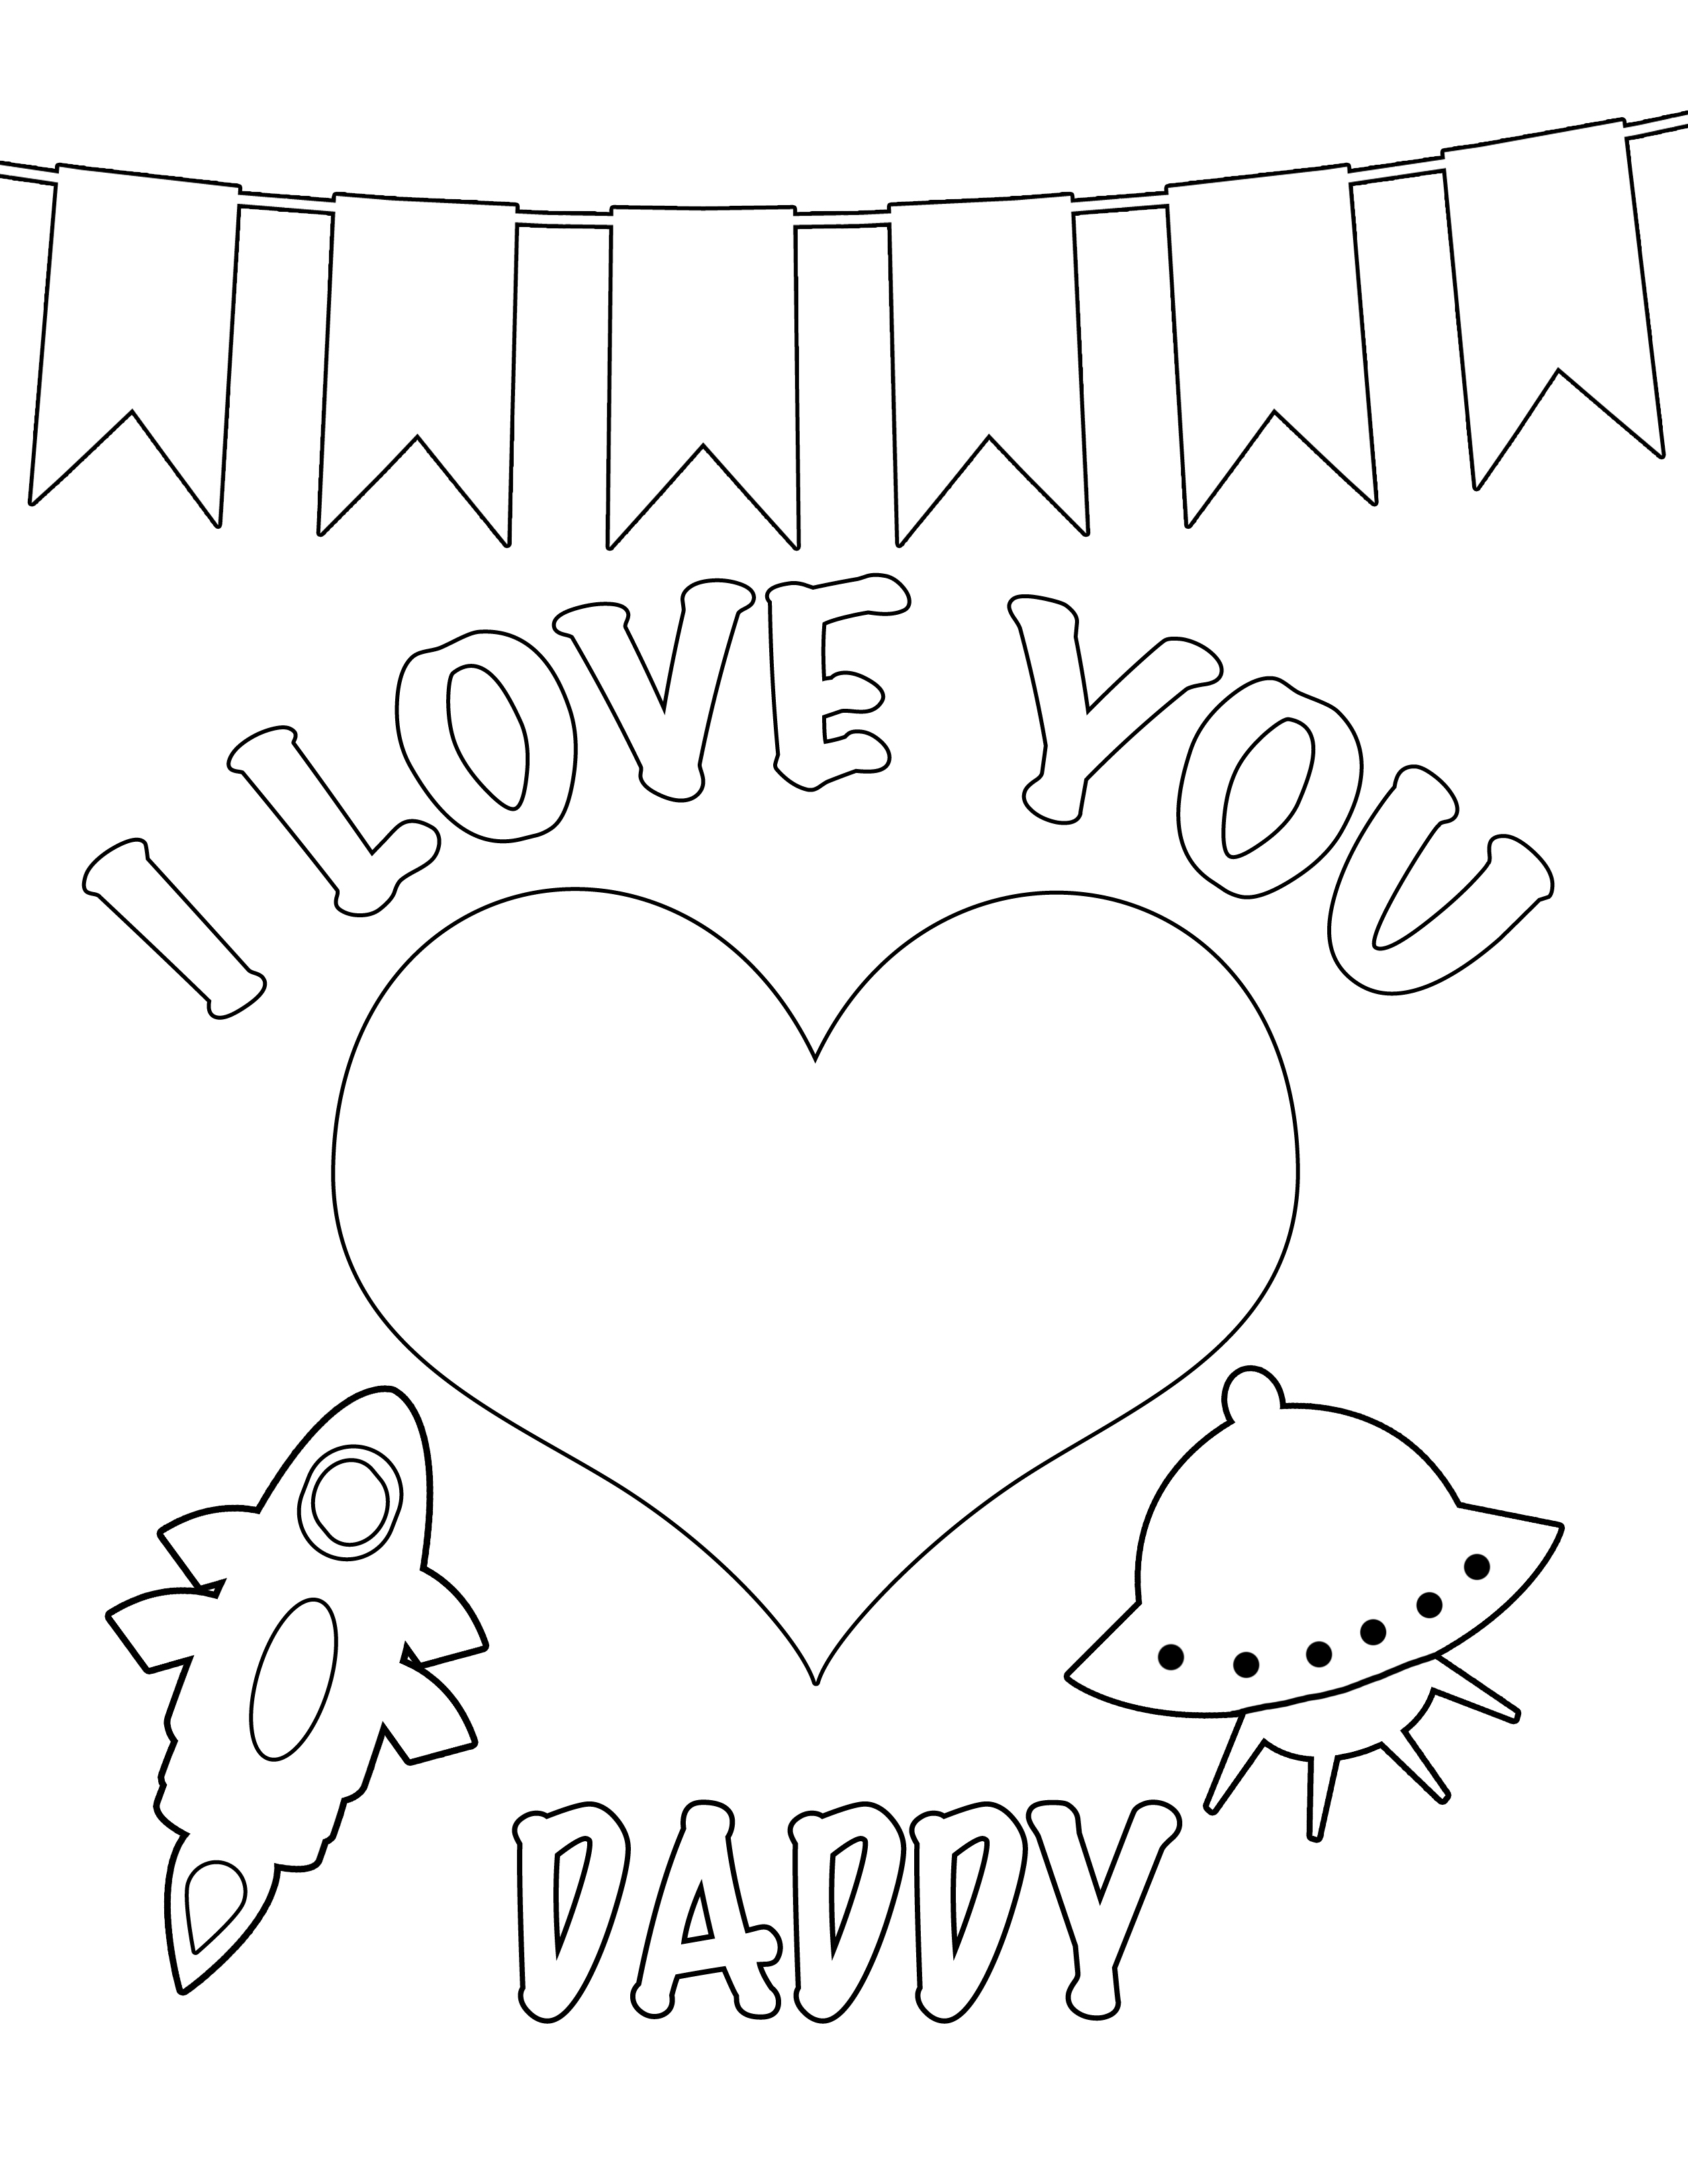 Coloring Pages ~ Outstanding Valentines Day Coloring Cards Free - Free Printable Valentines Day Cards For Mom And Dad